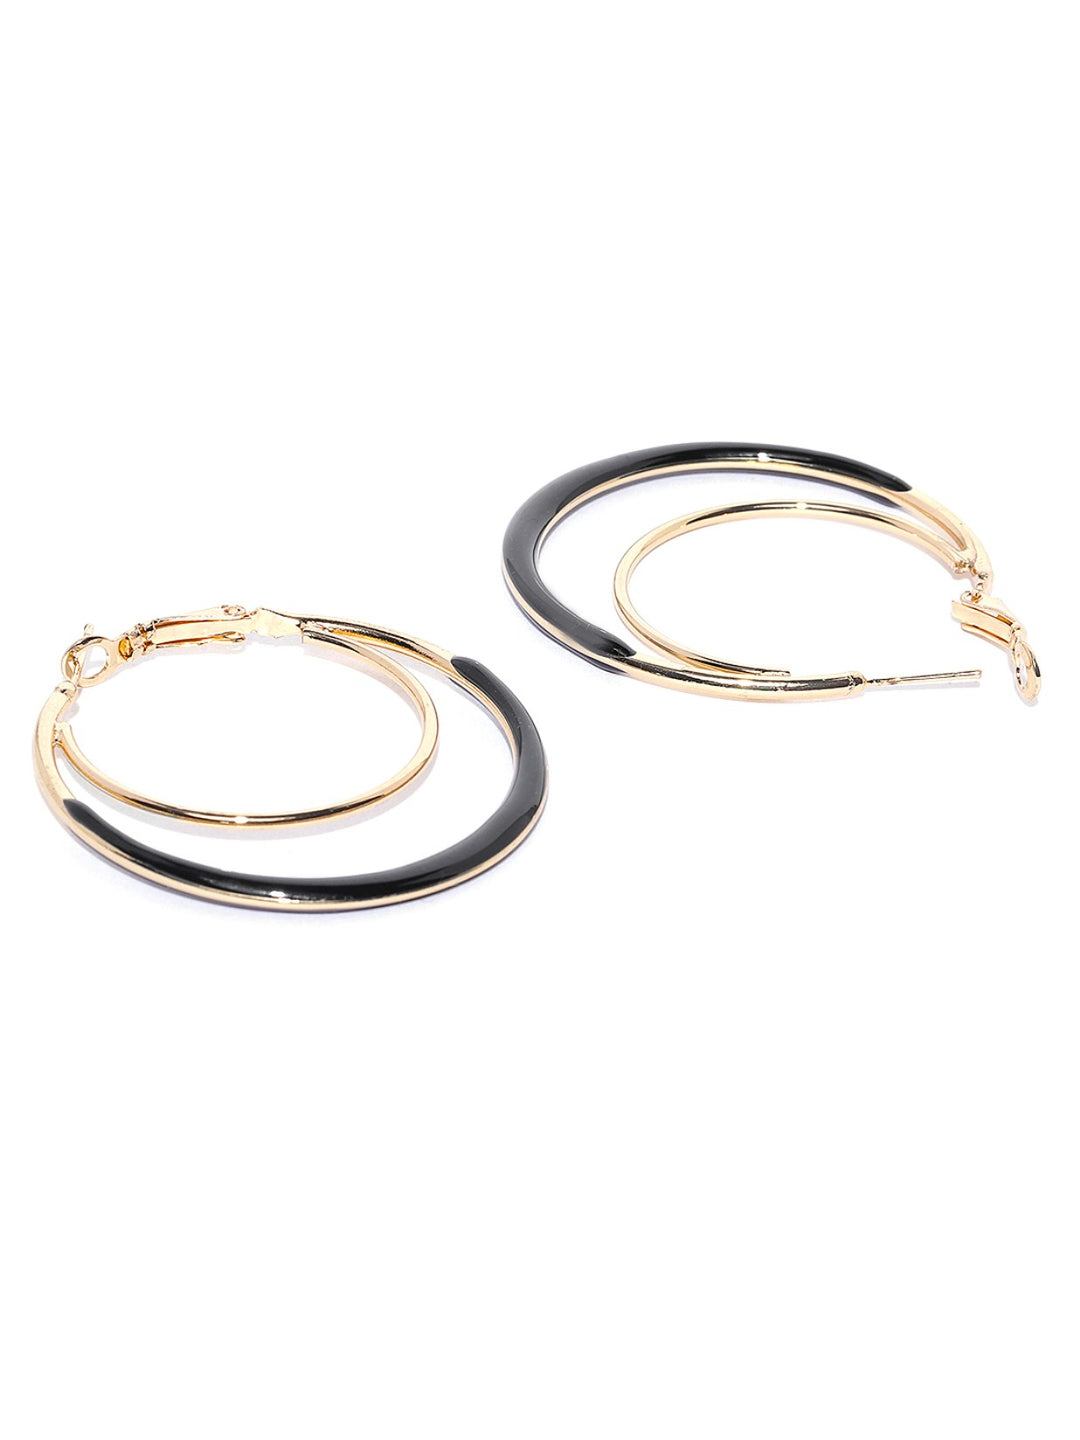 Designer Gold Plated Enamelled Black And Golden Dual Layer Stylish Fancy Party Wear Hoop Earrings For Women And Girls